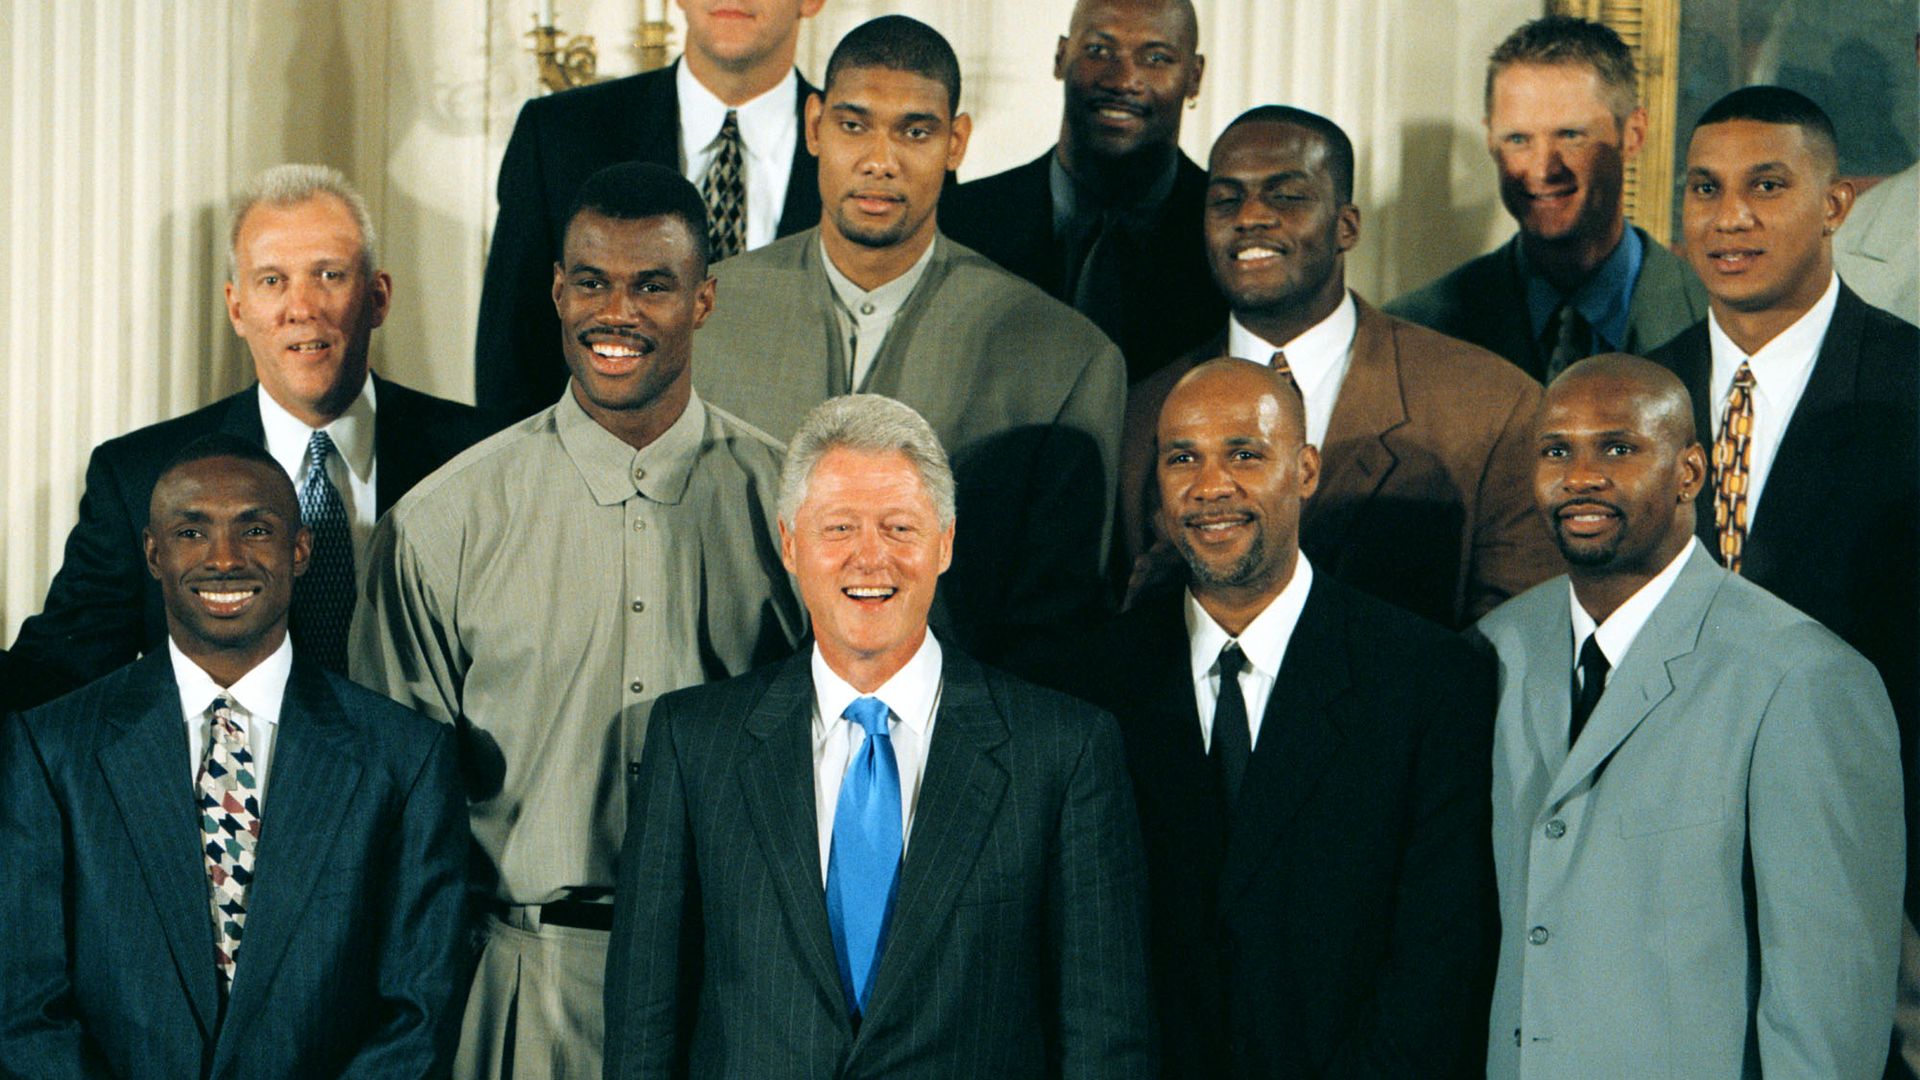 Spurs at the White House